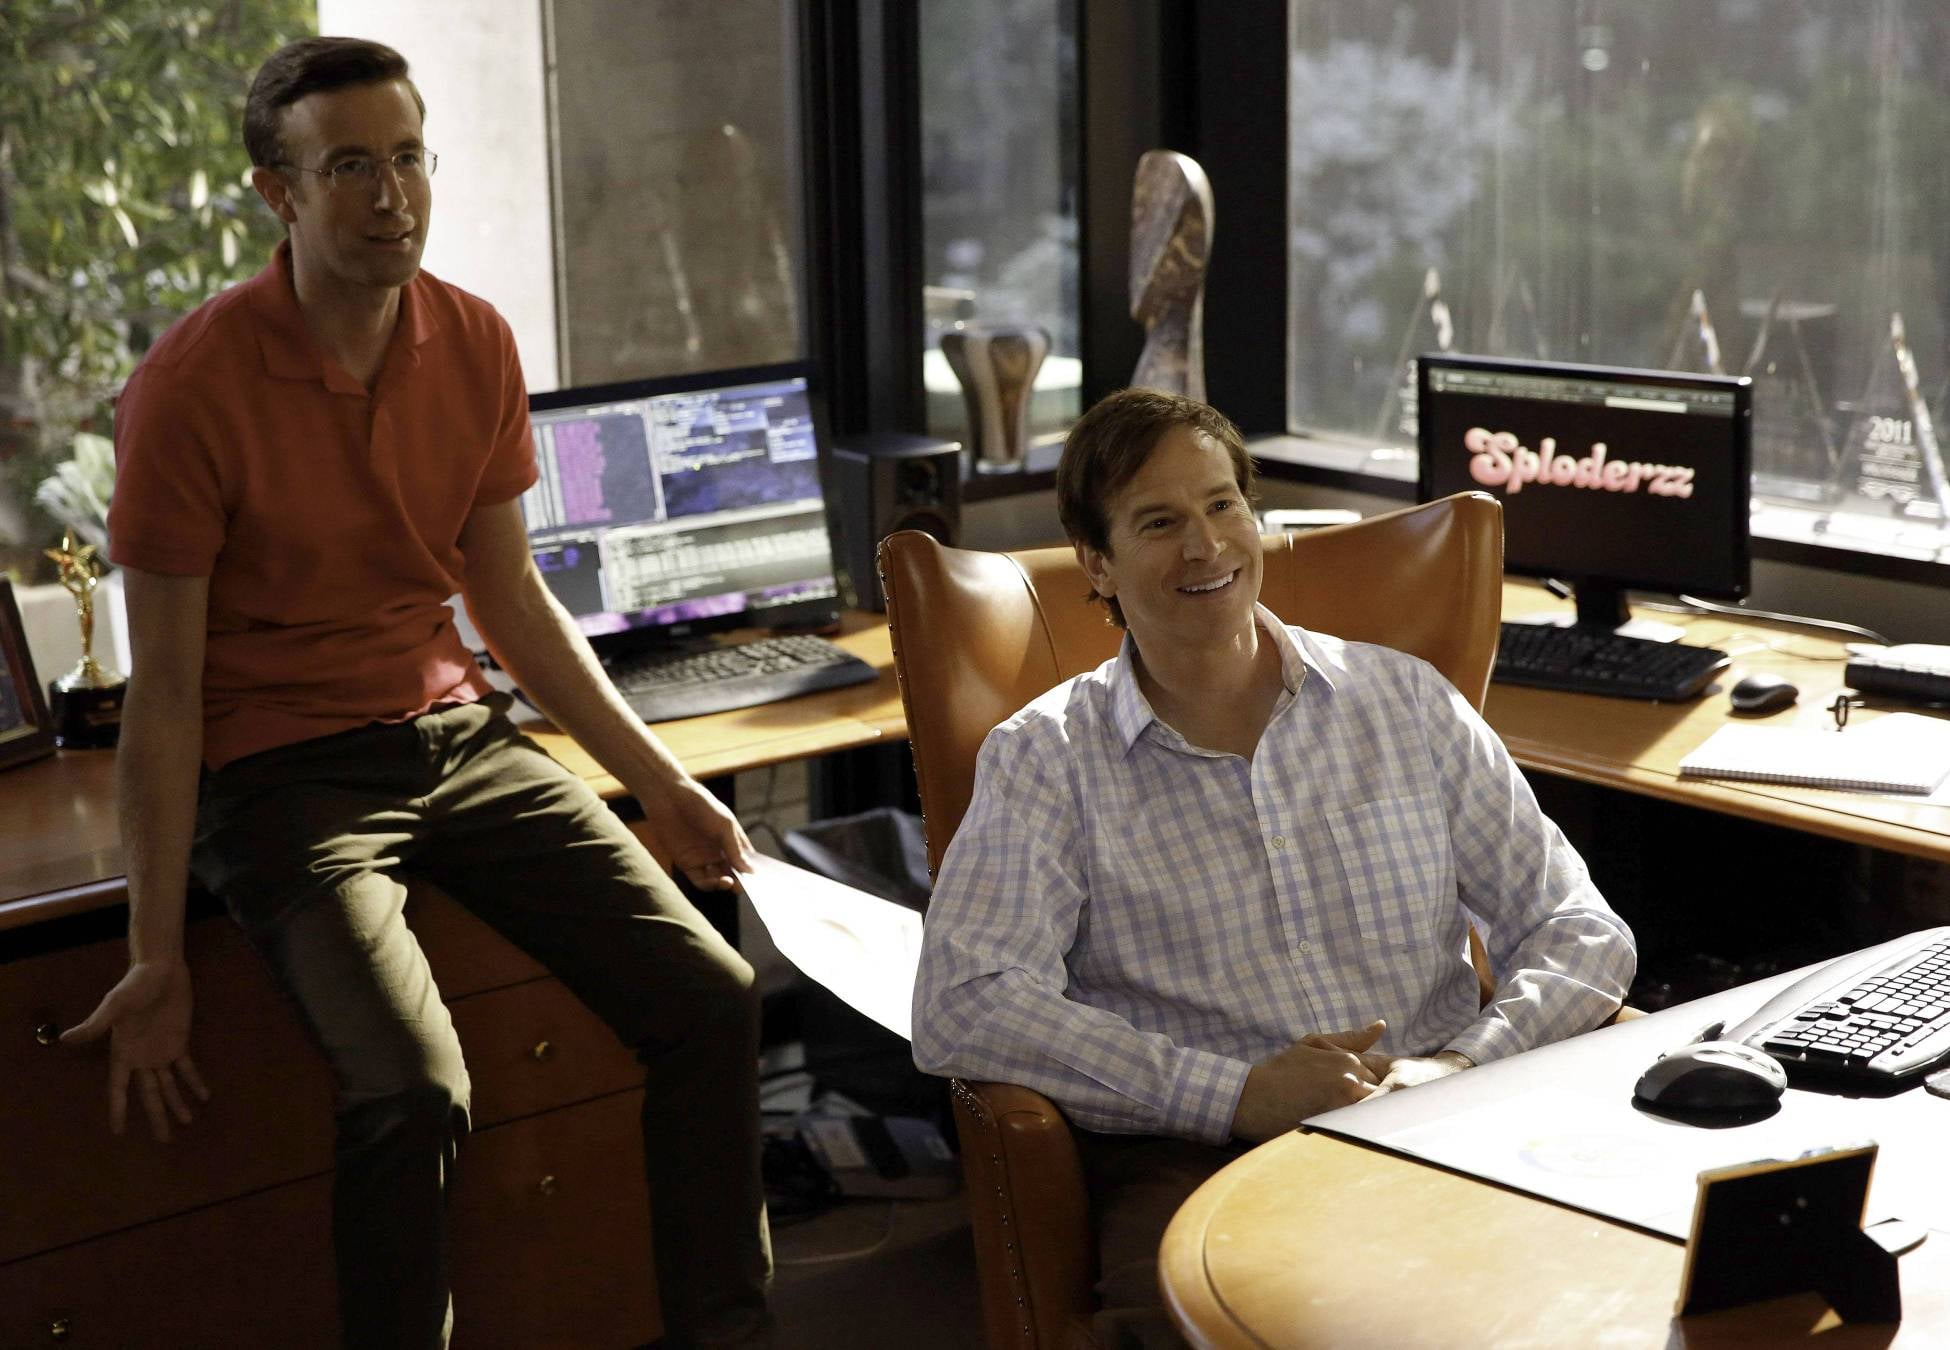 Rob Huebel and Matt Oberg guest-star in the episode as the owners of Sploderzz.com.